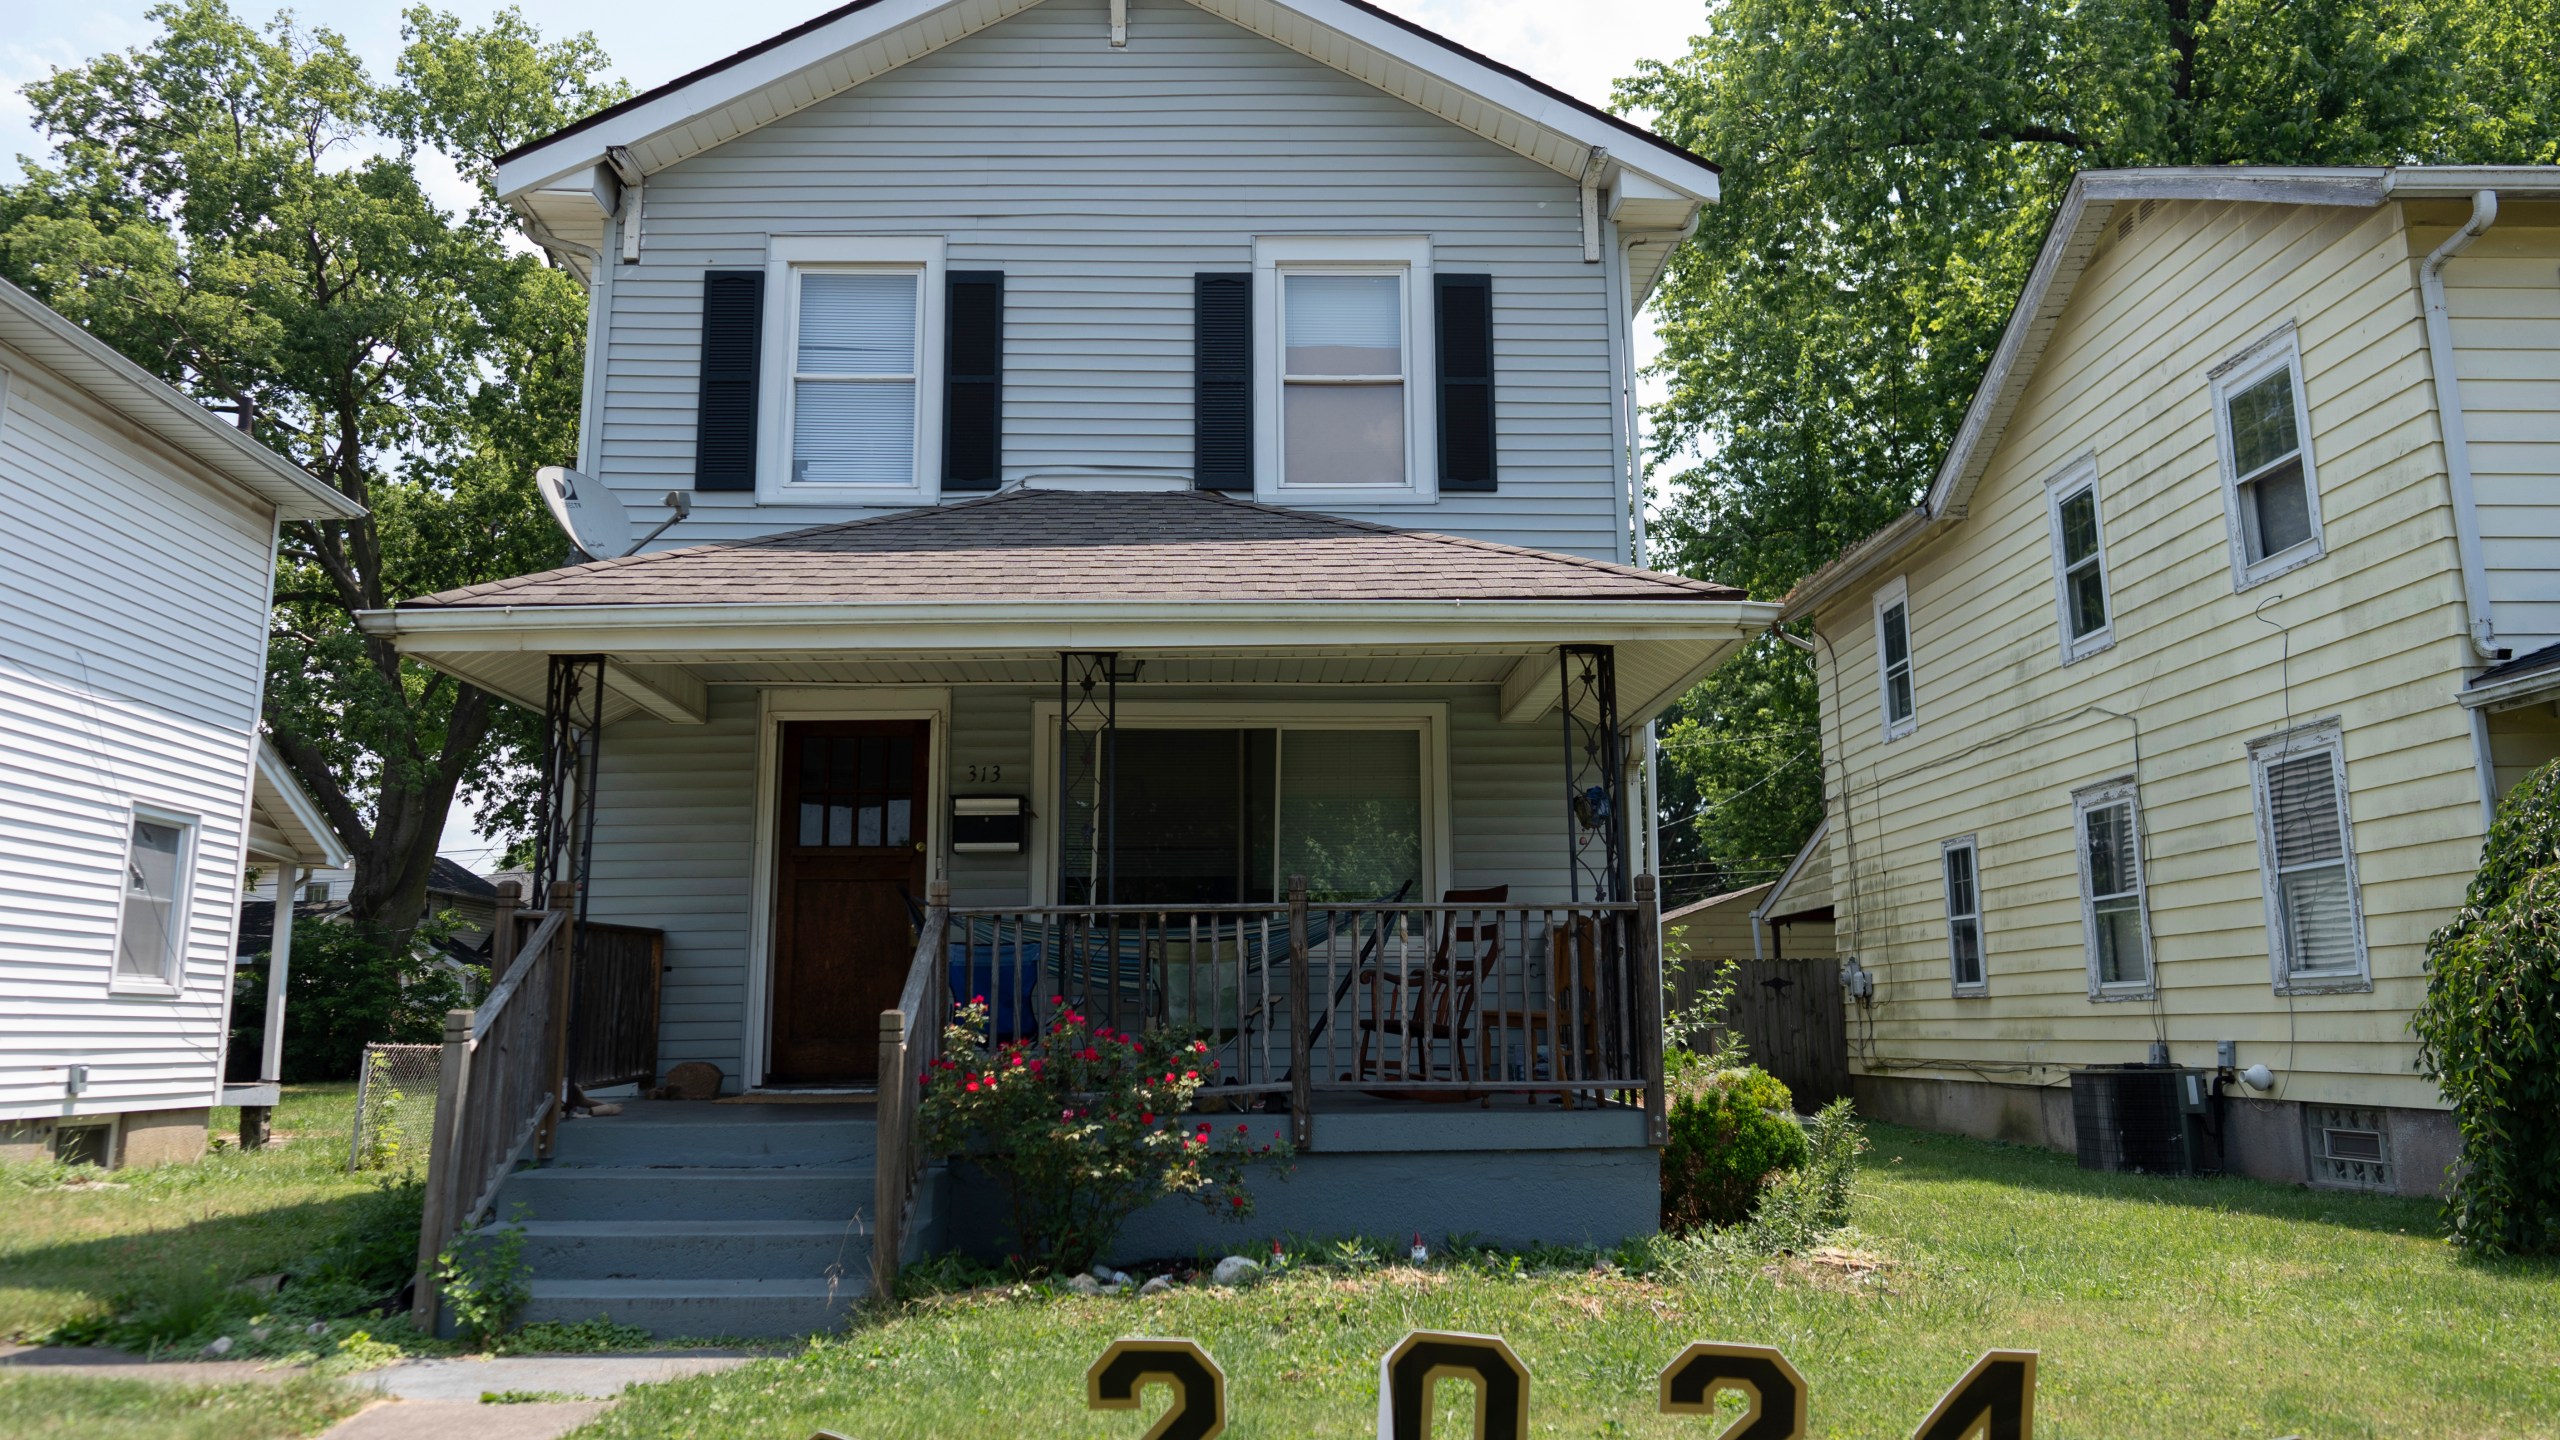 The house where Amanda Bailey and her family live is seen on Friday, June 21, 2024, in Middletown, Ohio. It is the house where "Hillbilly Elegy" author Sen. J.D. Vance, R-Ohio, grew up. Bailey said she thought “Hillbilly Elegy” nailed it, and that former President Donald Trump and Vance would “make a great team.” (AP Photo/Carolyn Kaster)